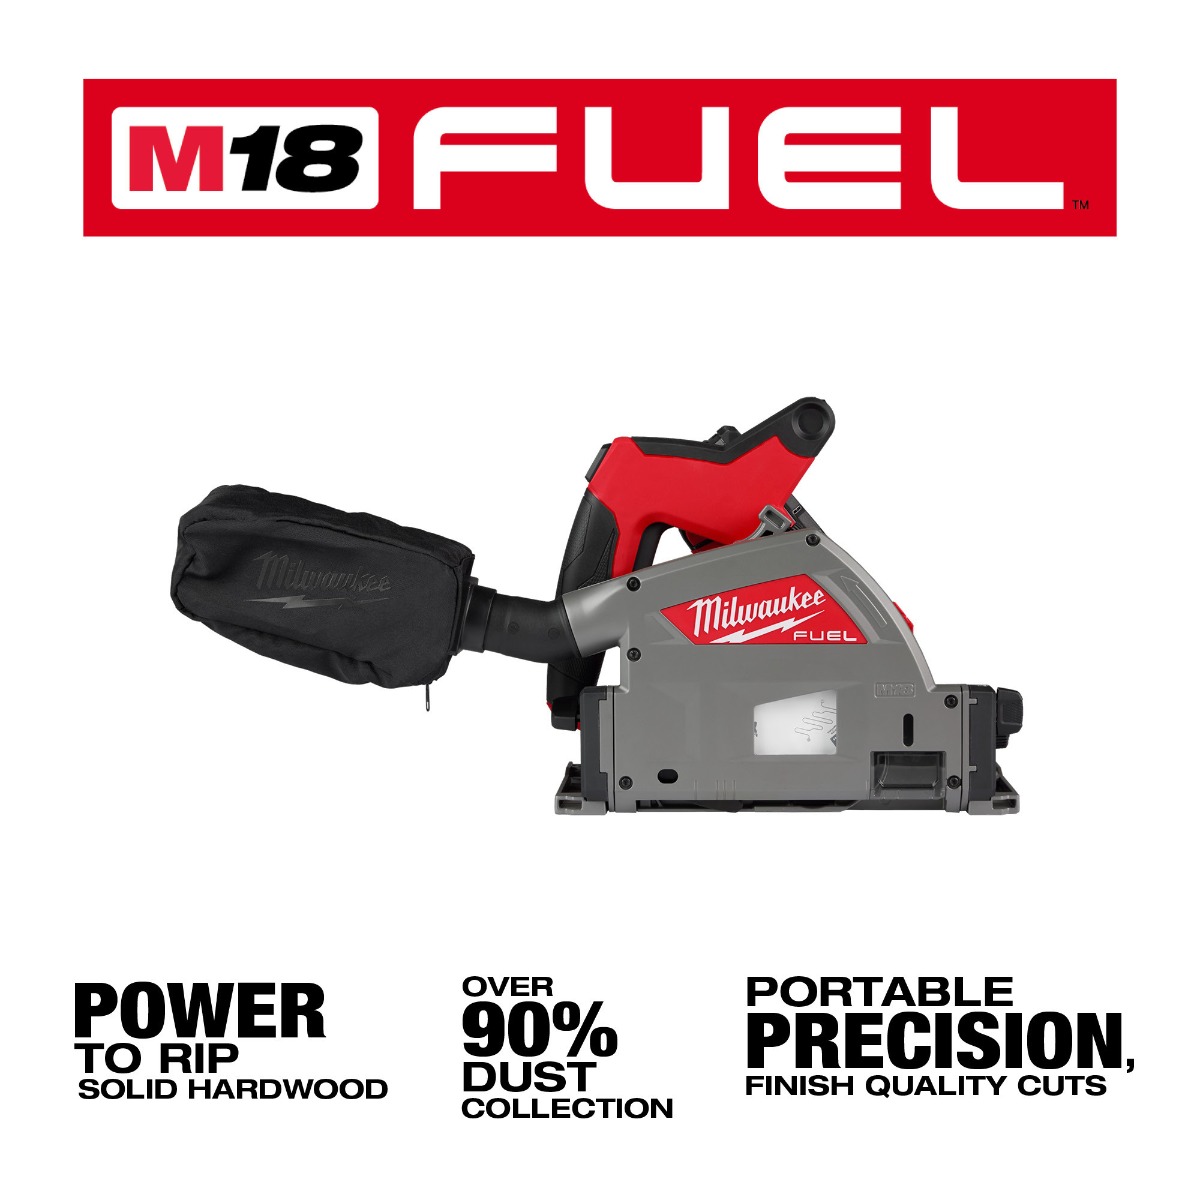 M18 FUEL 18 Volt Lithium-Ion Brushless Cordless 6-1/2 in. Plunge Track Saw Kit